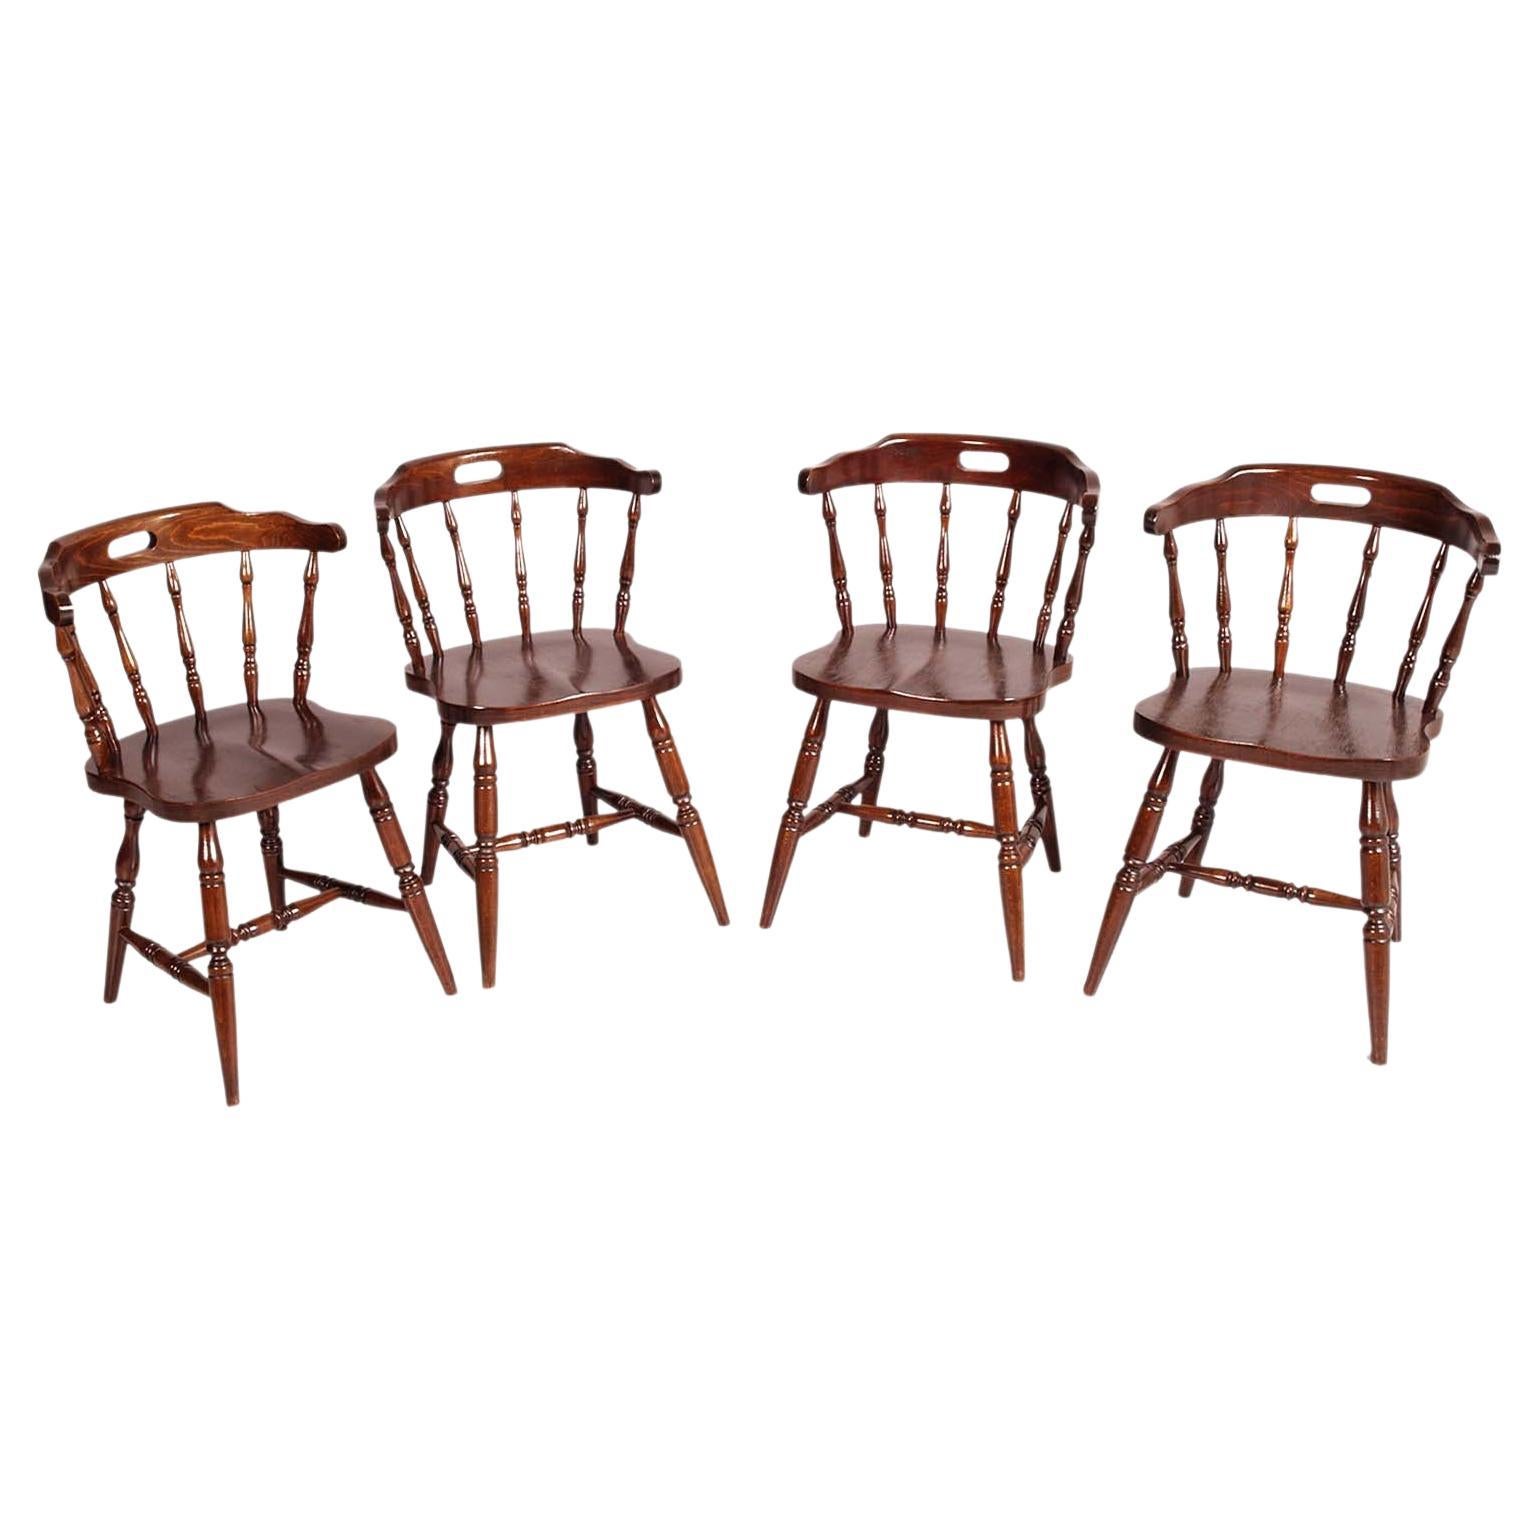 Mid Century Original Tyrolean Robust Armchairs in Chestnut Wood, Wax Polished